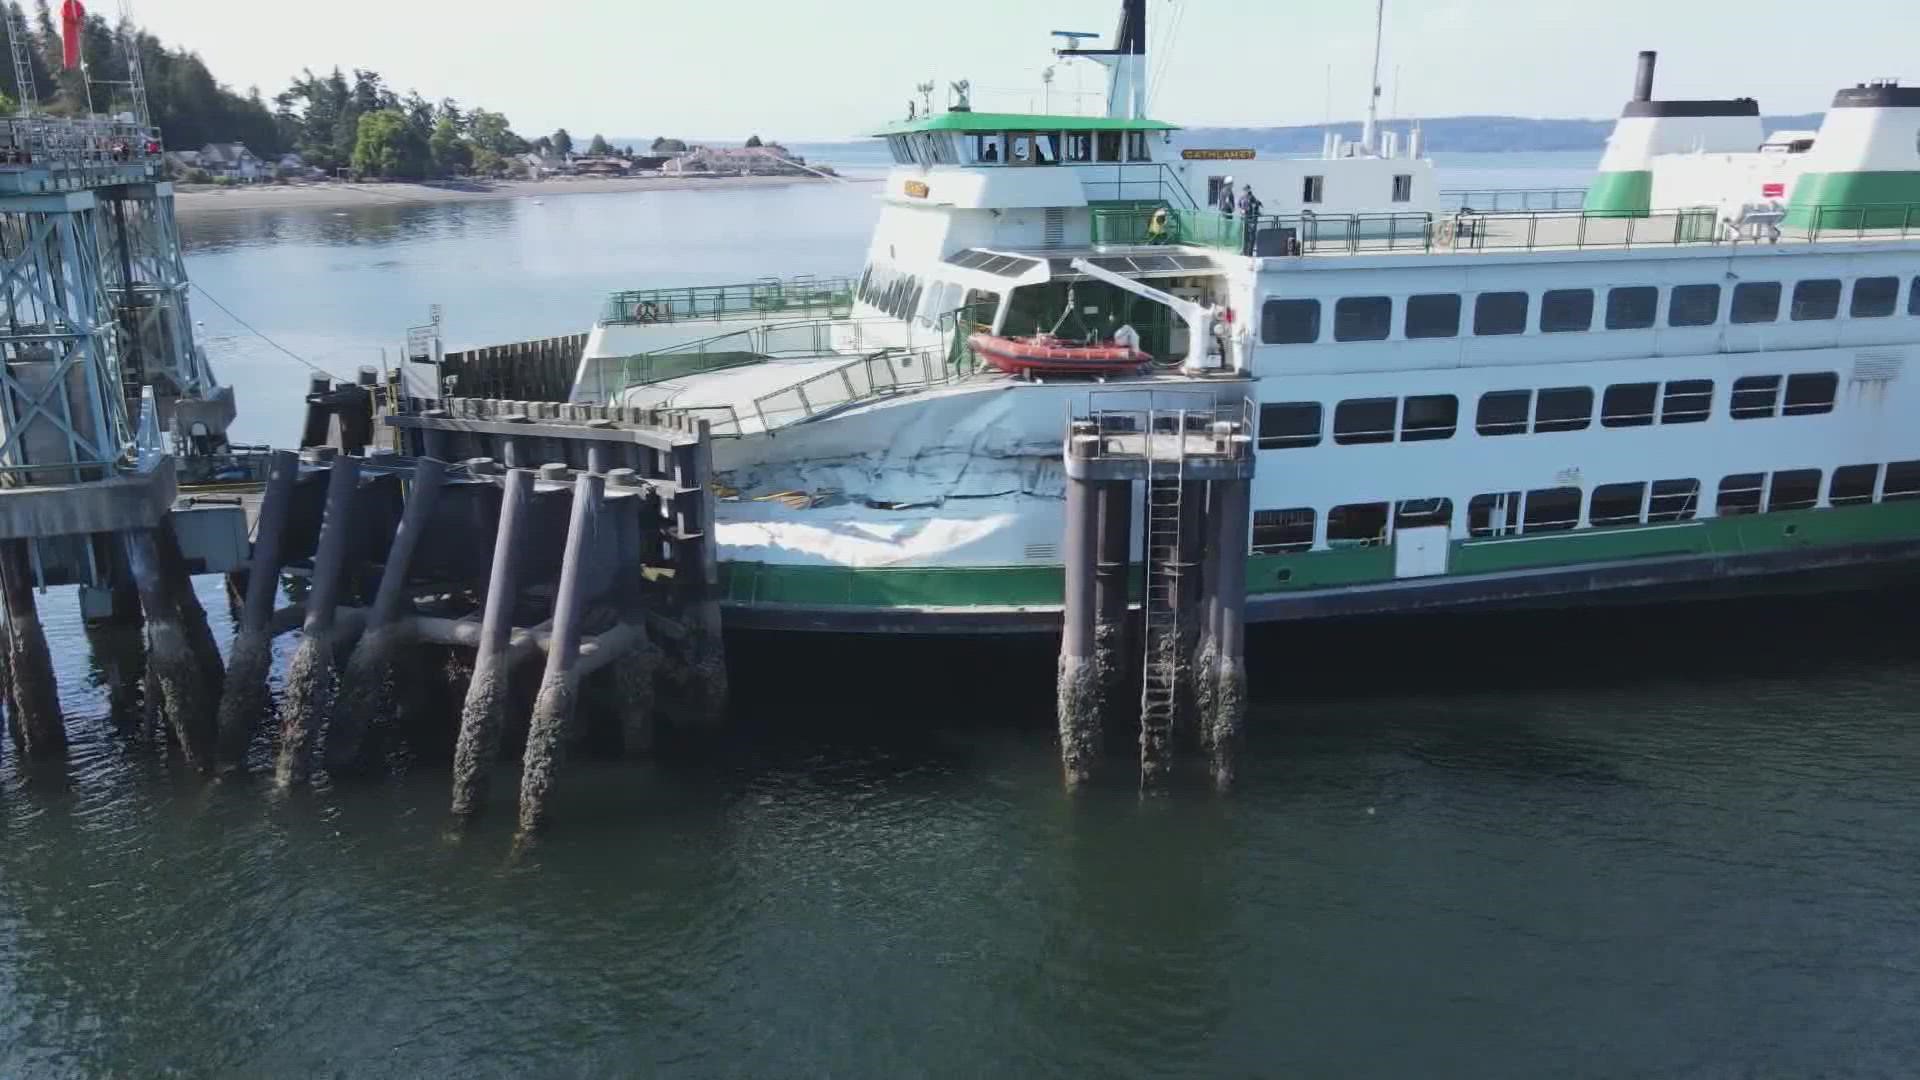 A ferry collided with an offshore dolphin, a terminal structure that helps guide ferries, at the Fauntleroy terminal in West Seattle Thursday morning.